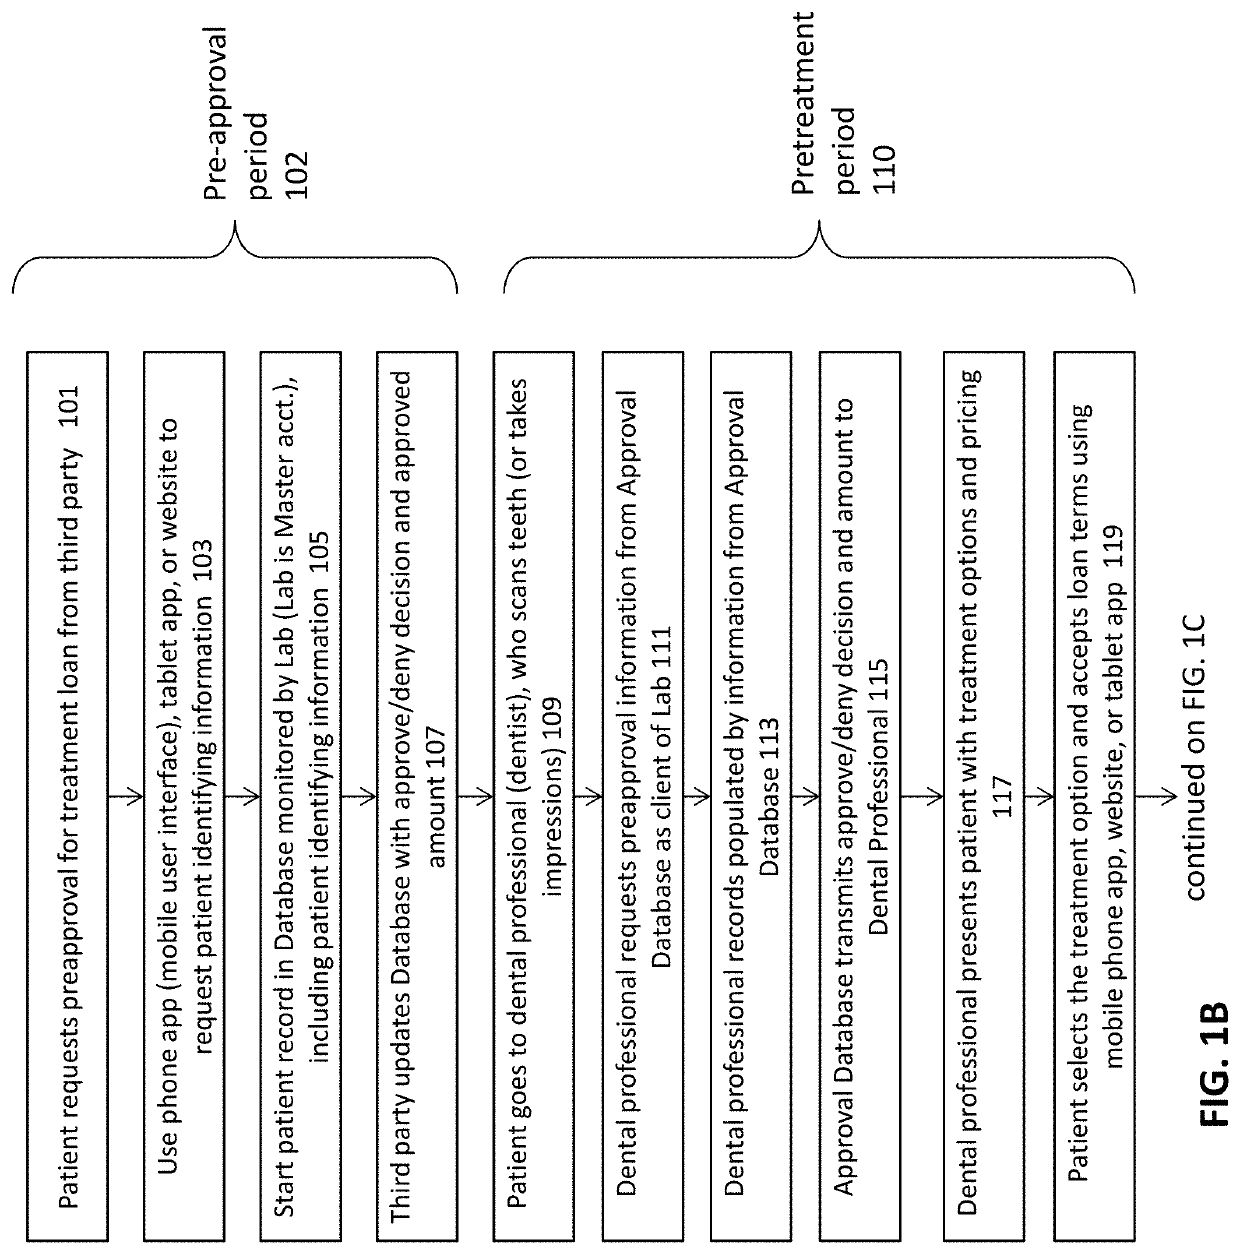 Method and apparatuses for interactive ordering of dental aligners